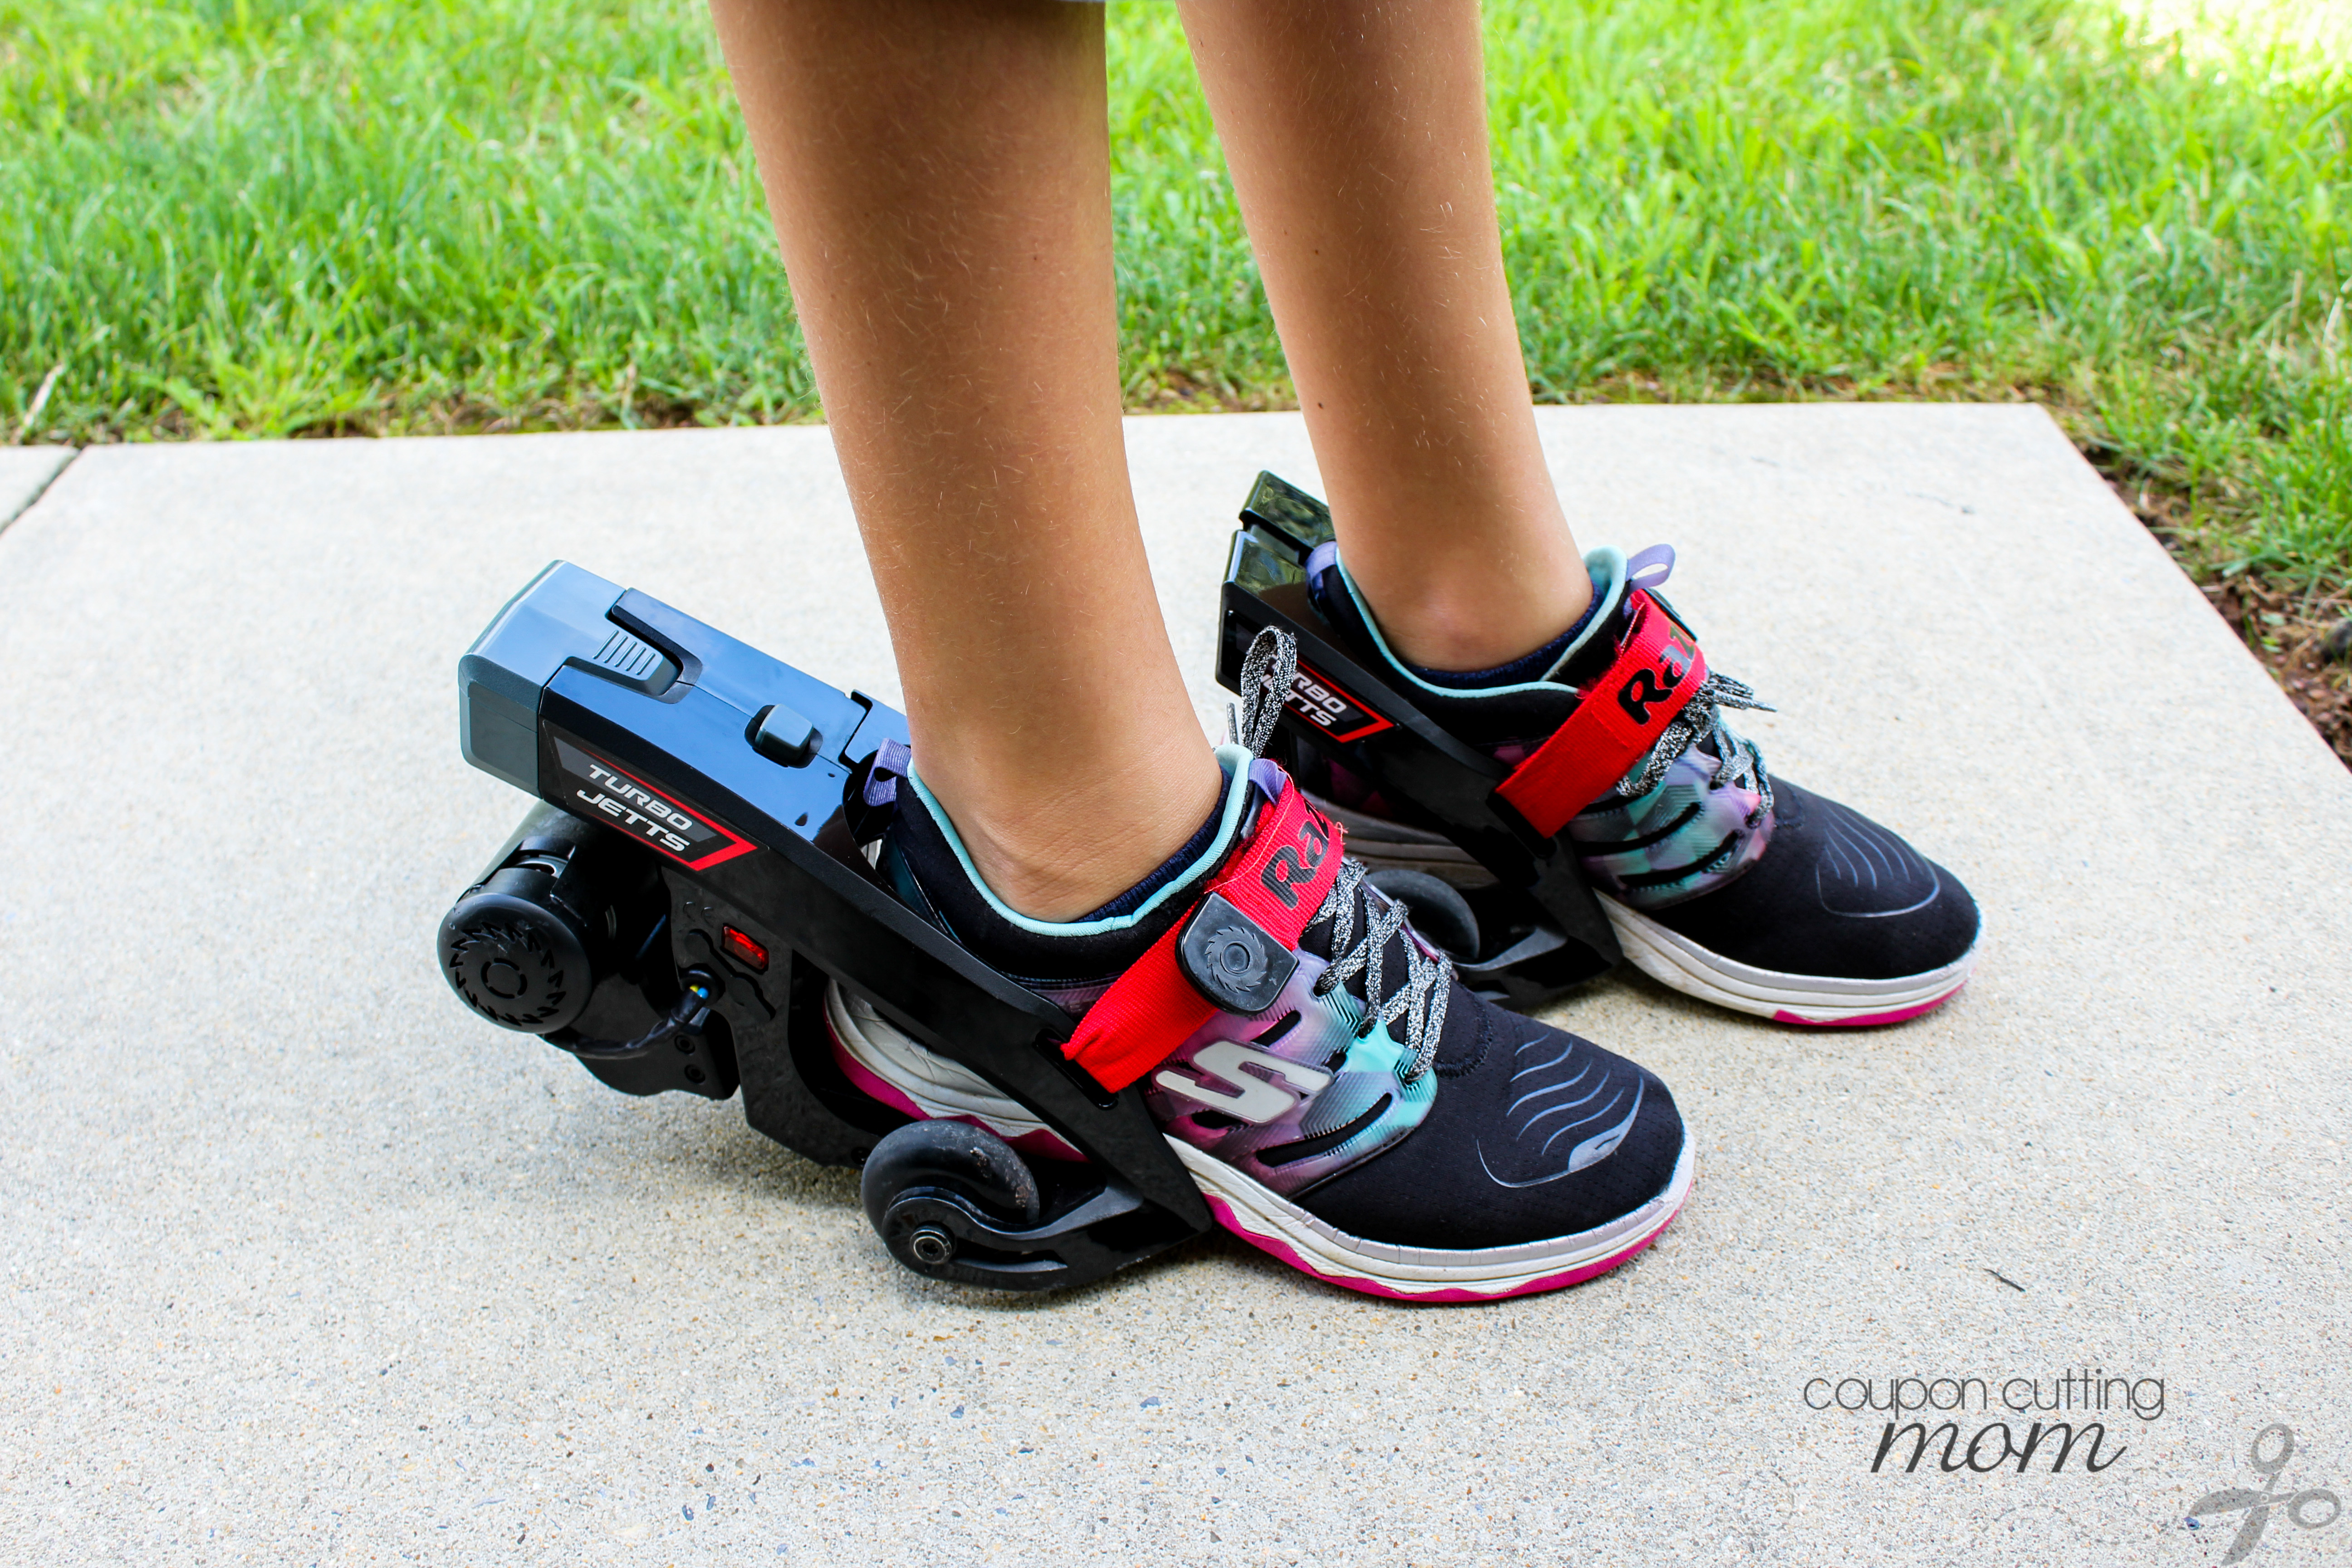 turbo jetts shoes